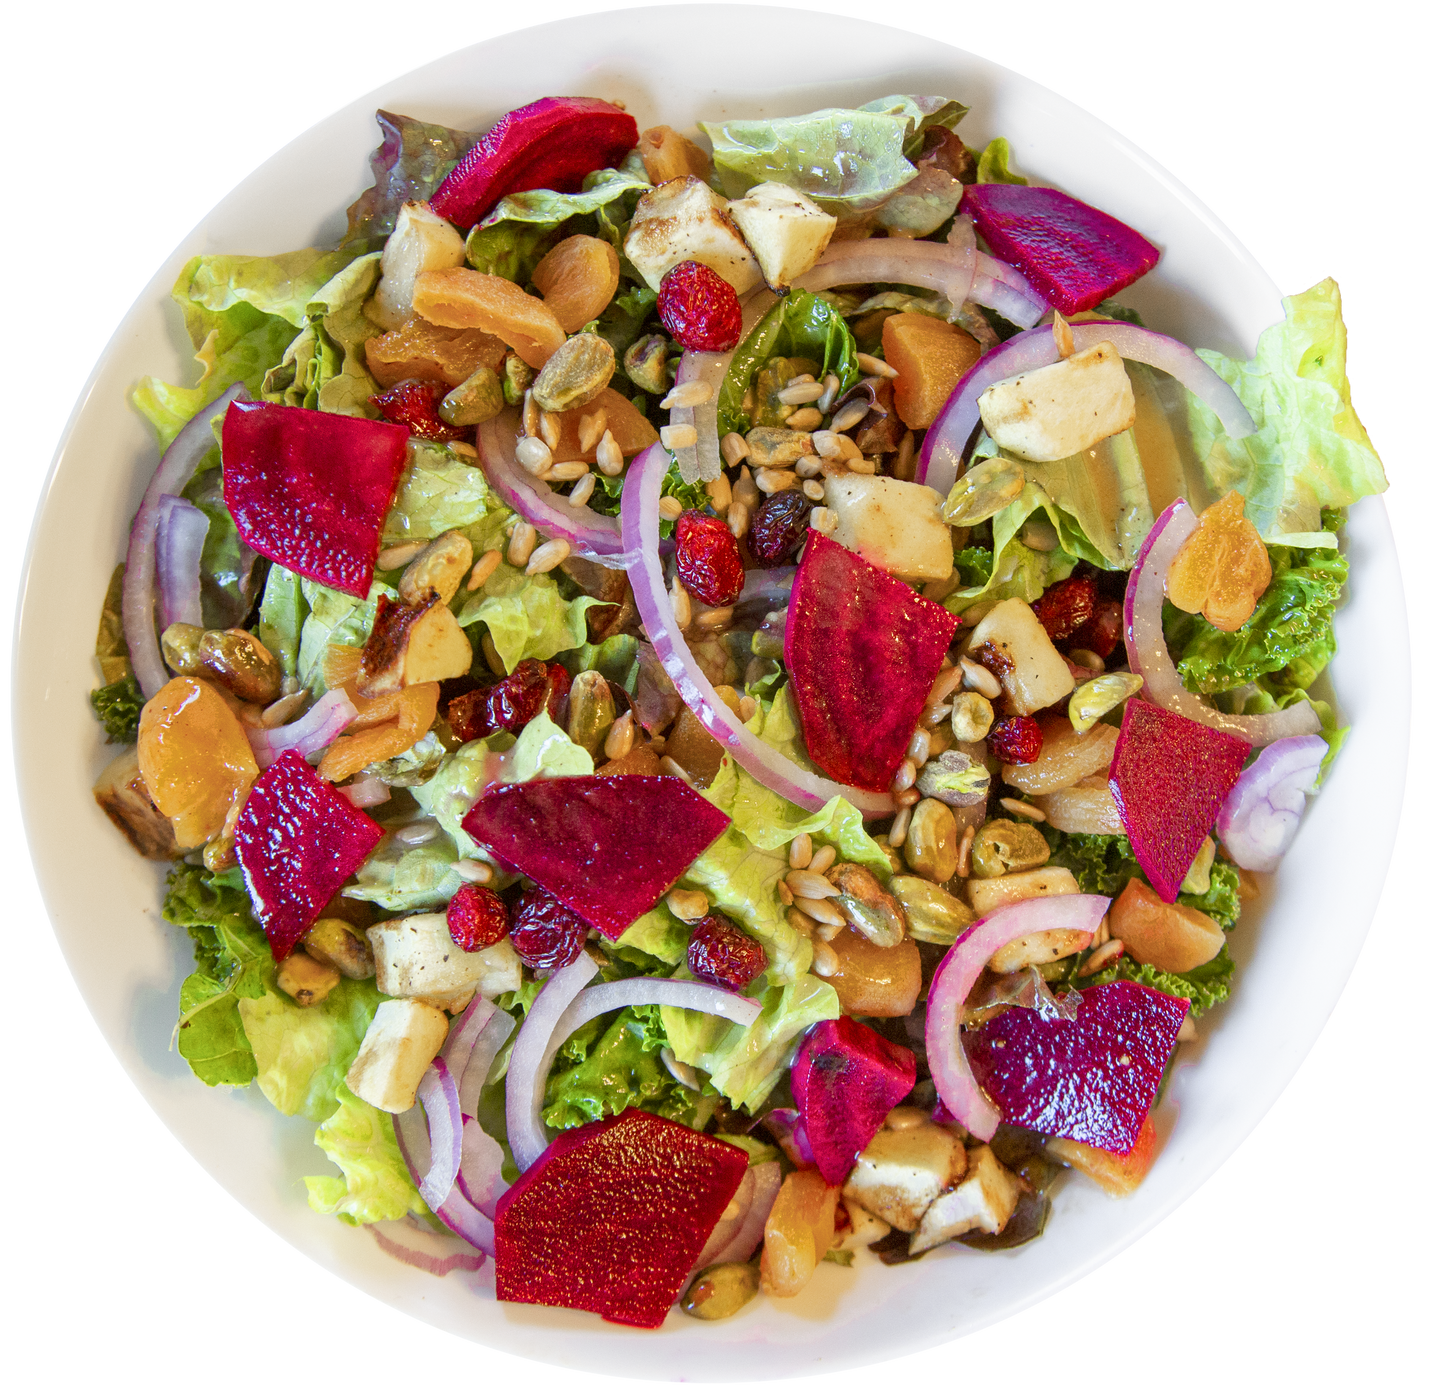 Beet and cranberry salad with seeds and raisins in Des Moines, Iowa